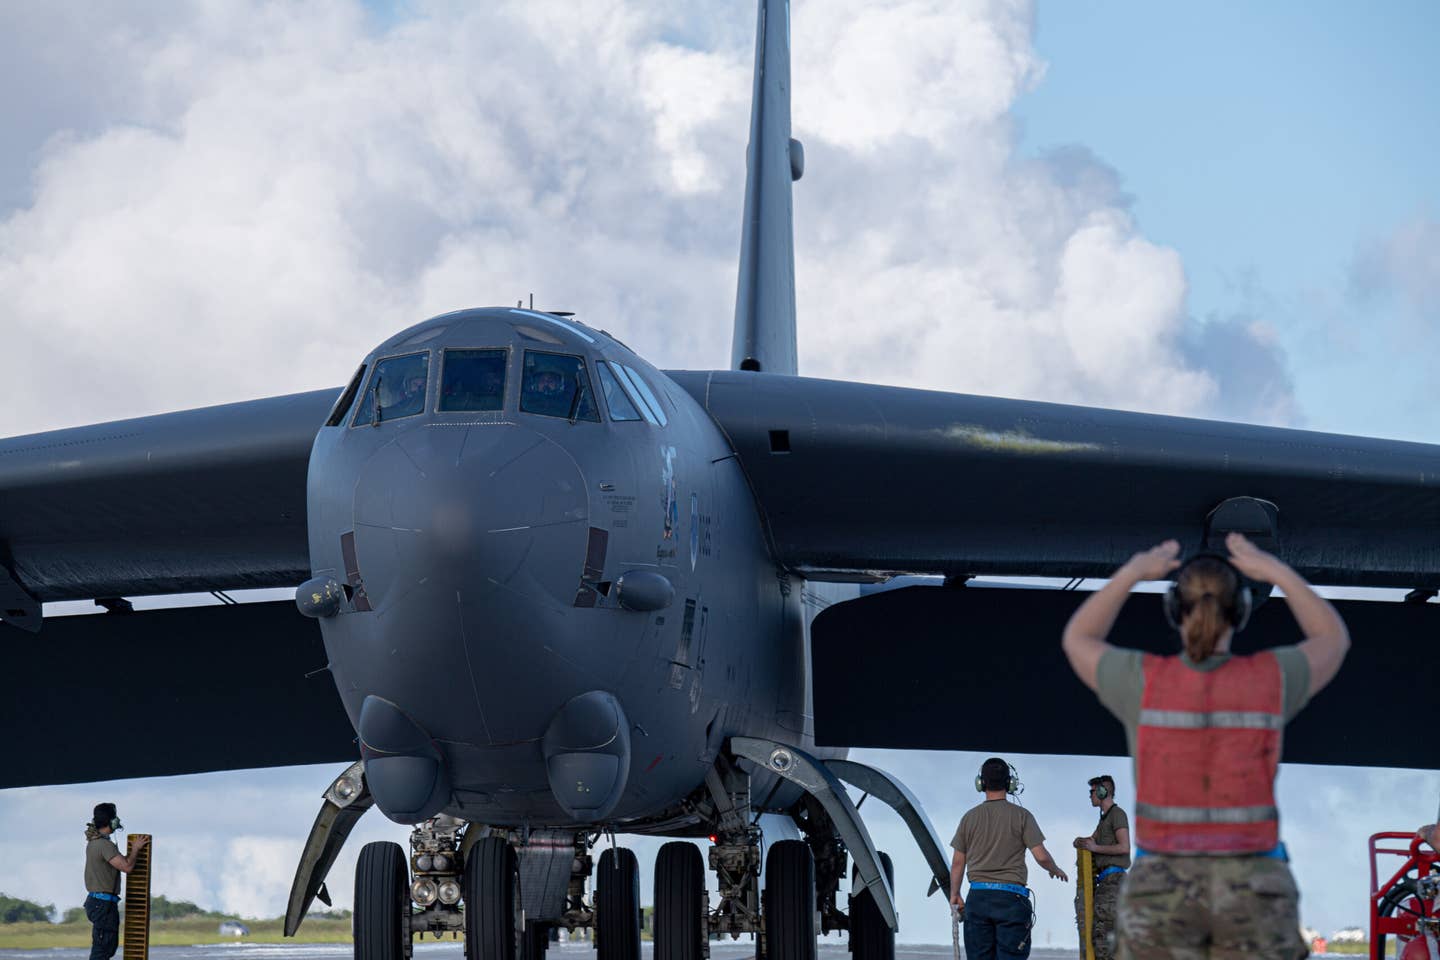 The two EVS fairings under the nose are clearly visible in the picture of a B-52H bomber. <em>USAF / Senior Airman Jovante Johnson</em>